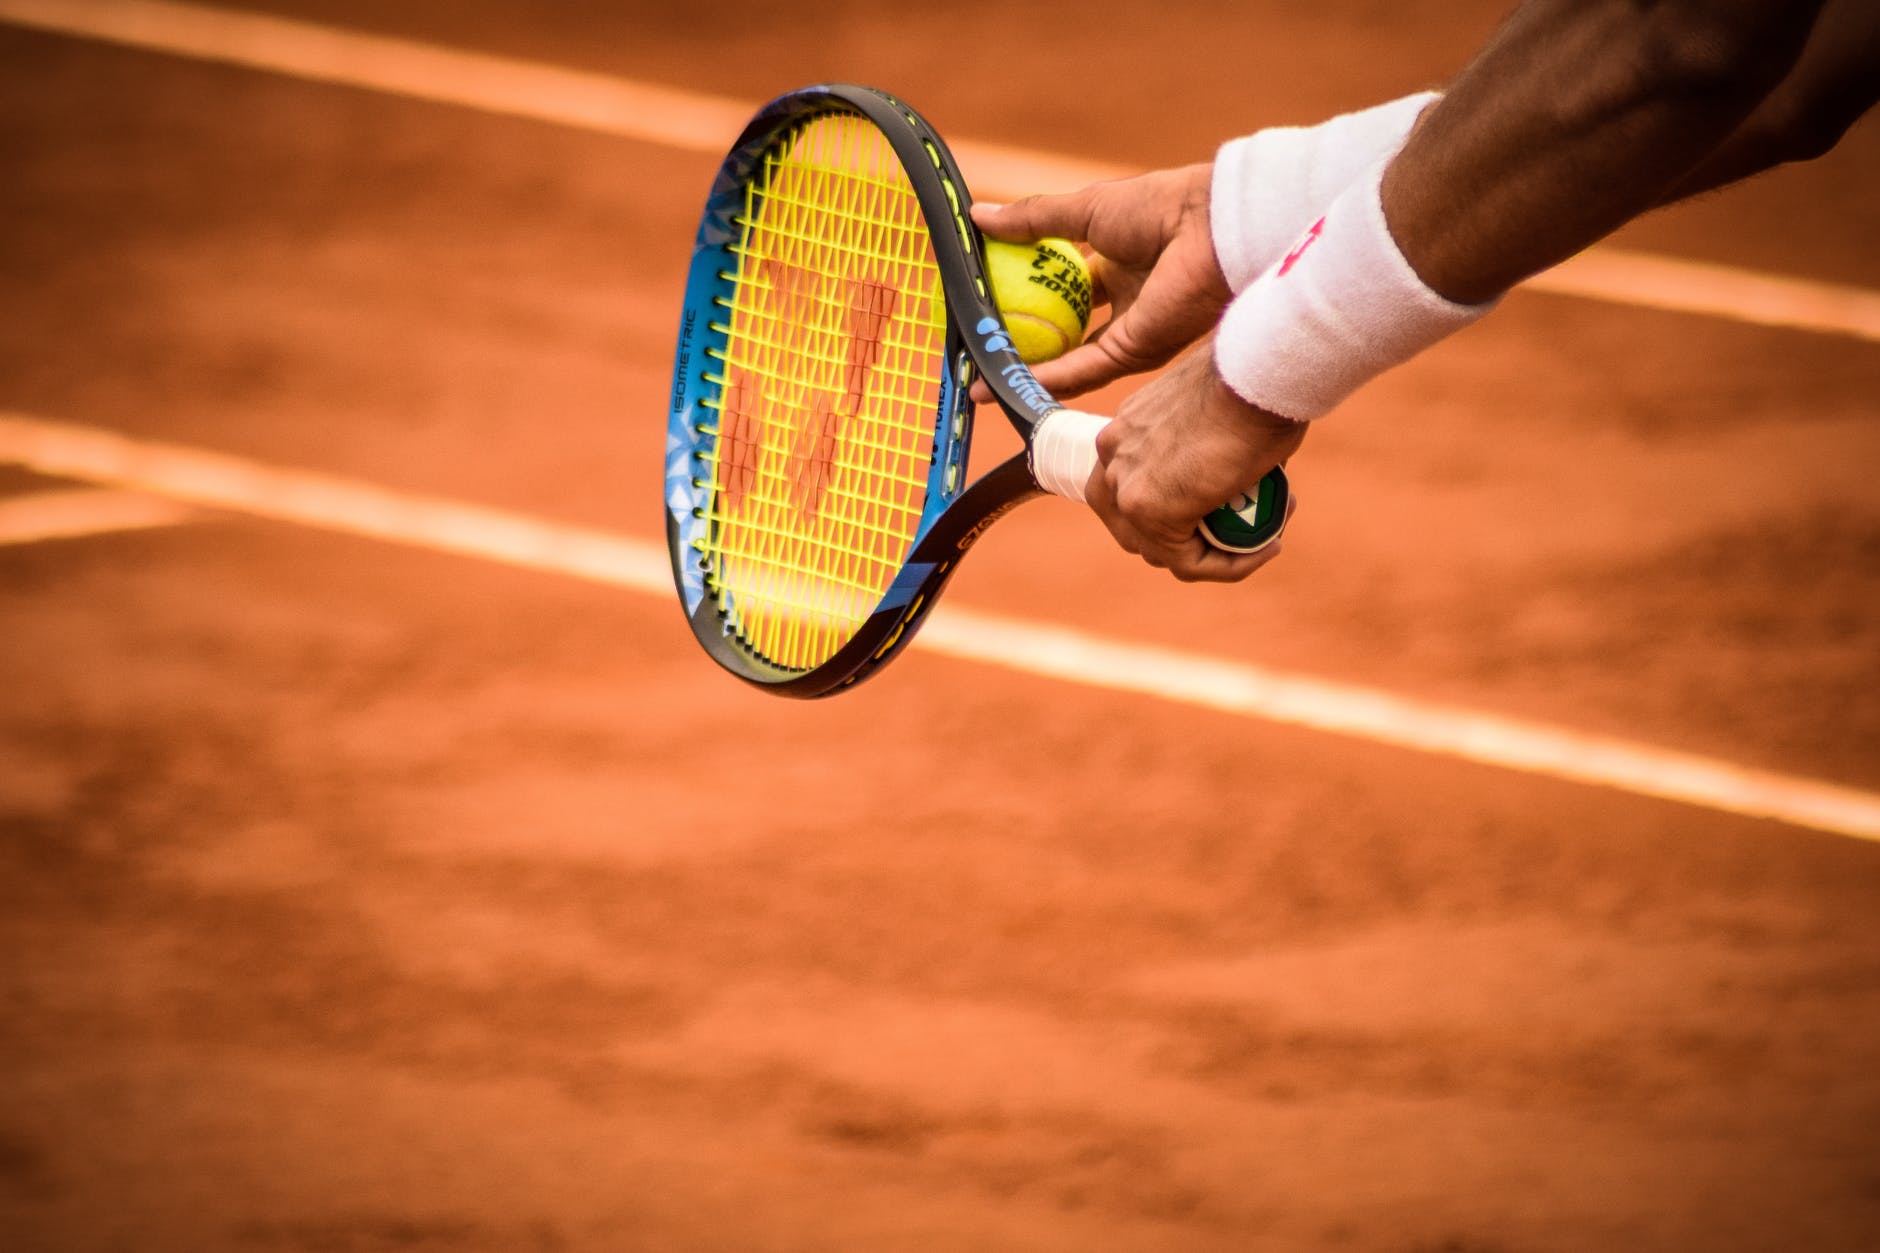 close up photo of person holding tennis racket and ball